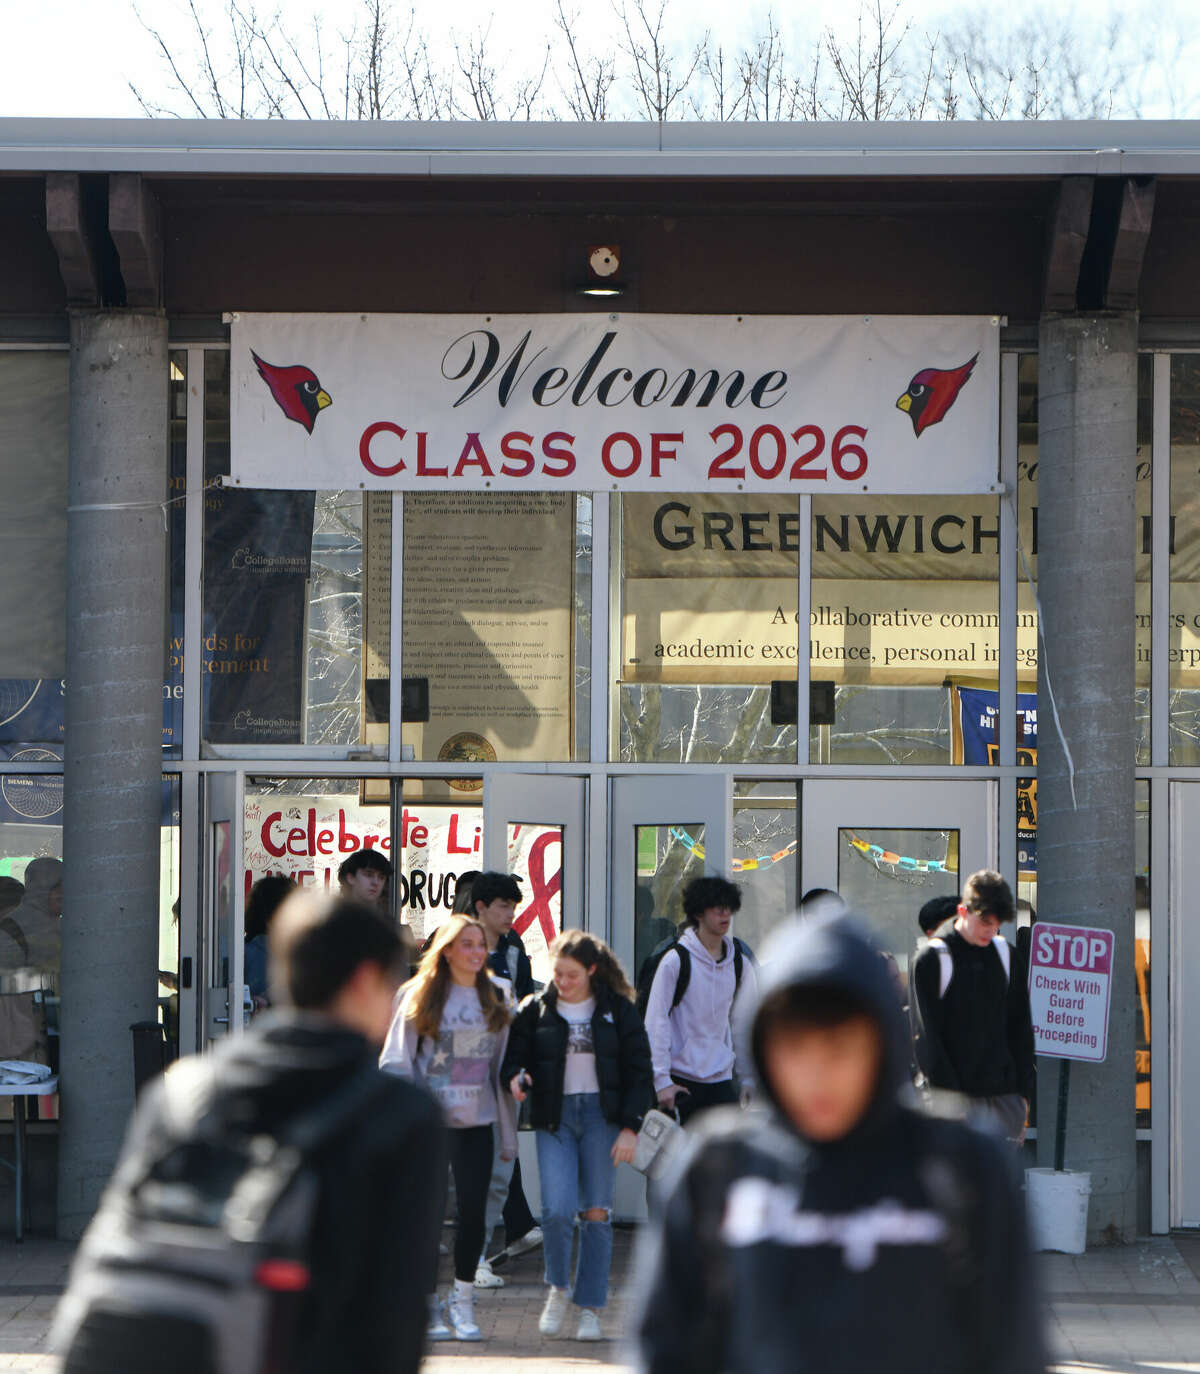 Students exit during dismissal at Greenwich High School in Greenwich, Conn. Tuesday, March 16, 2023.